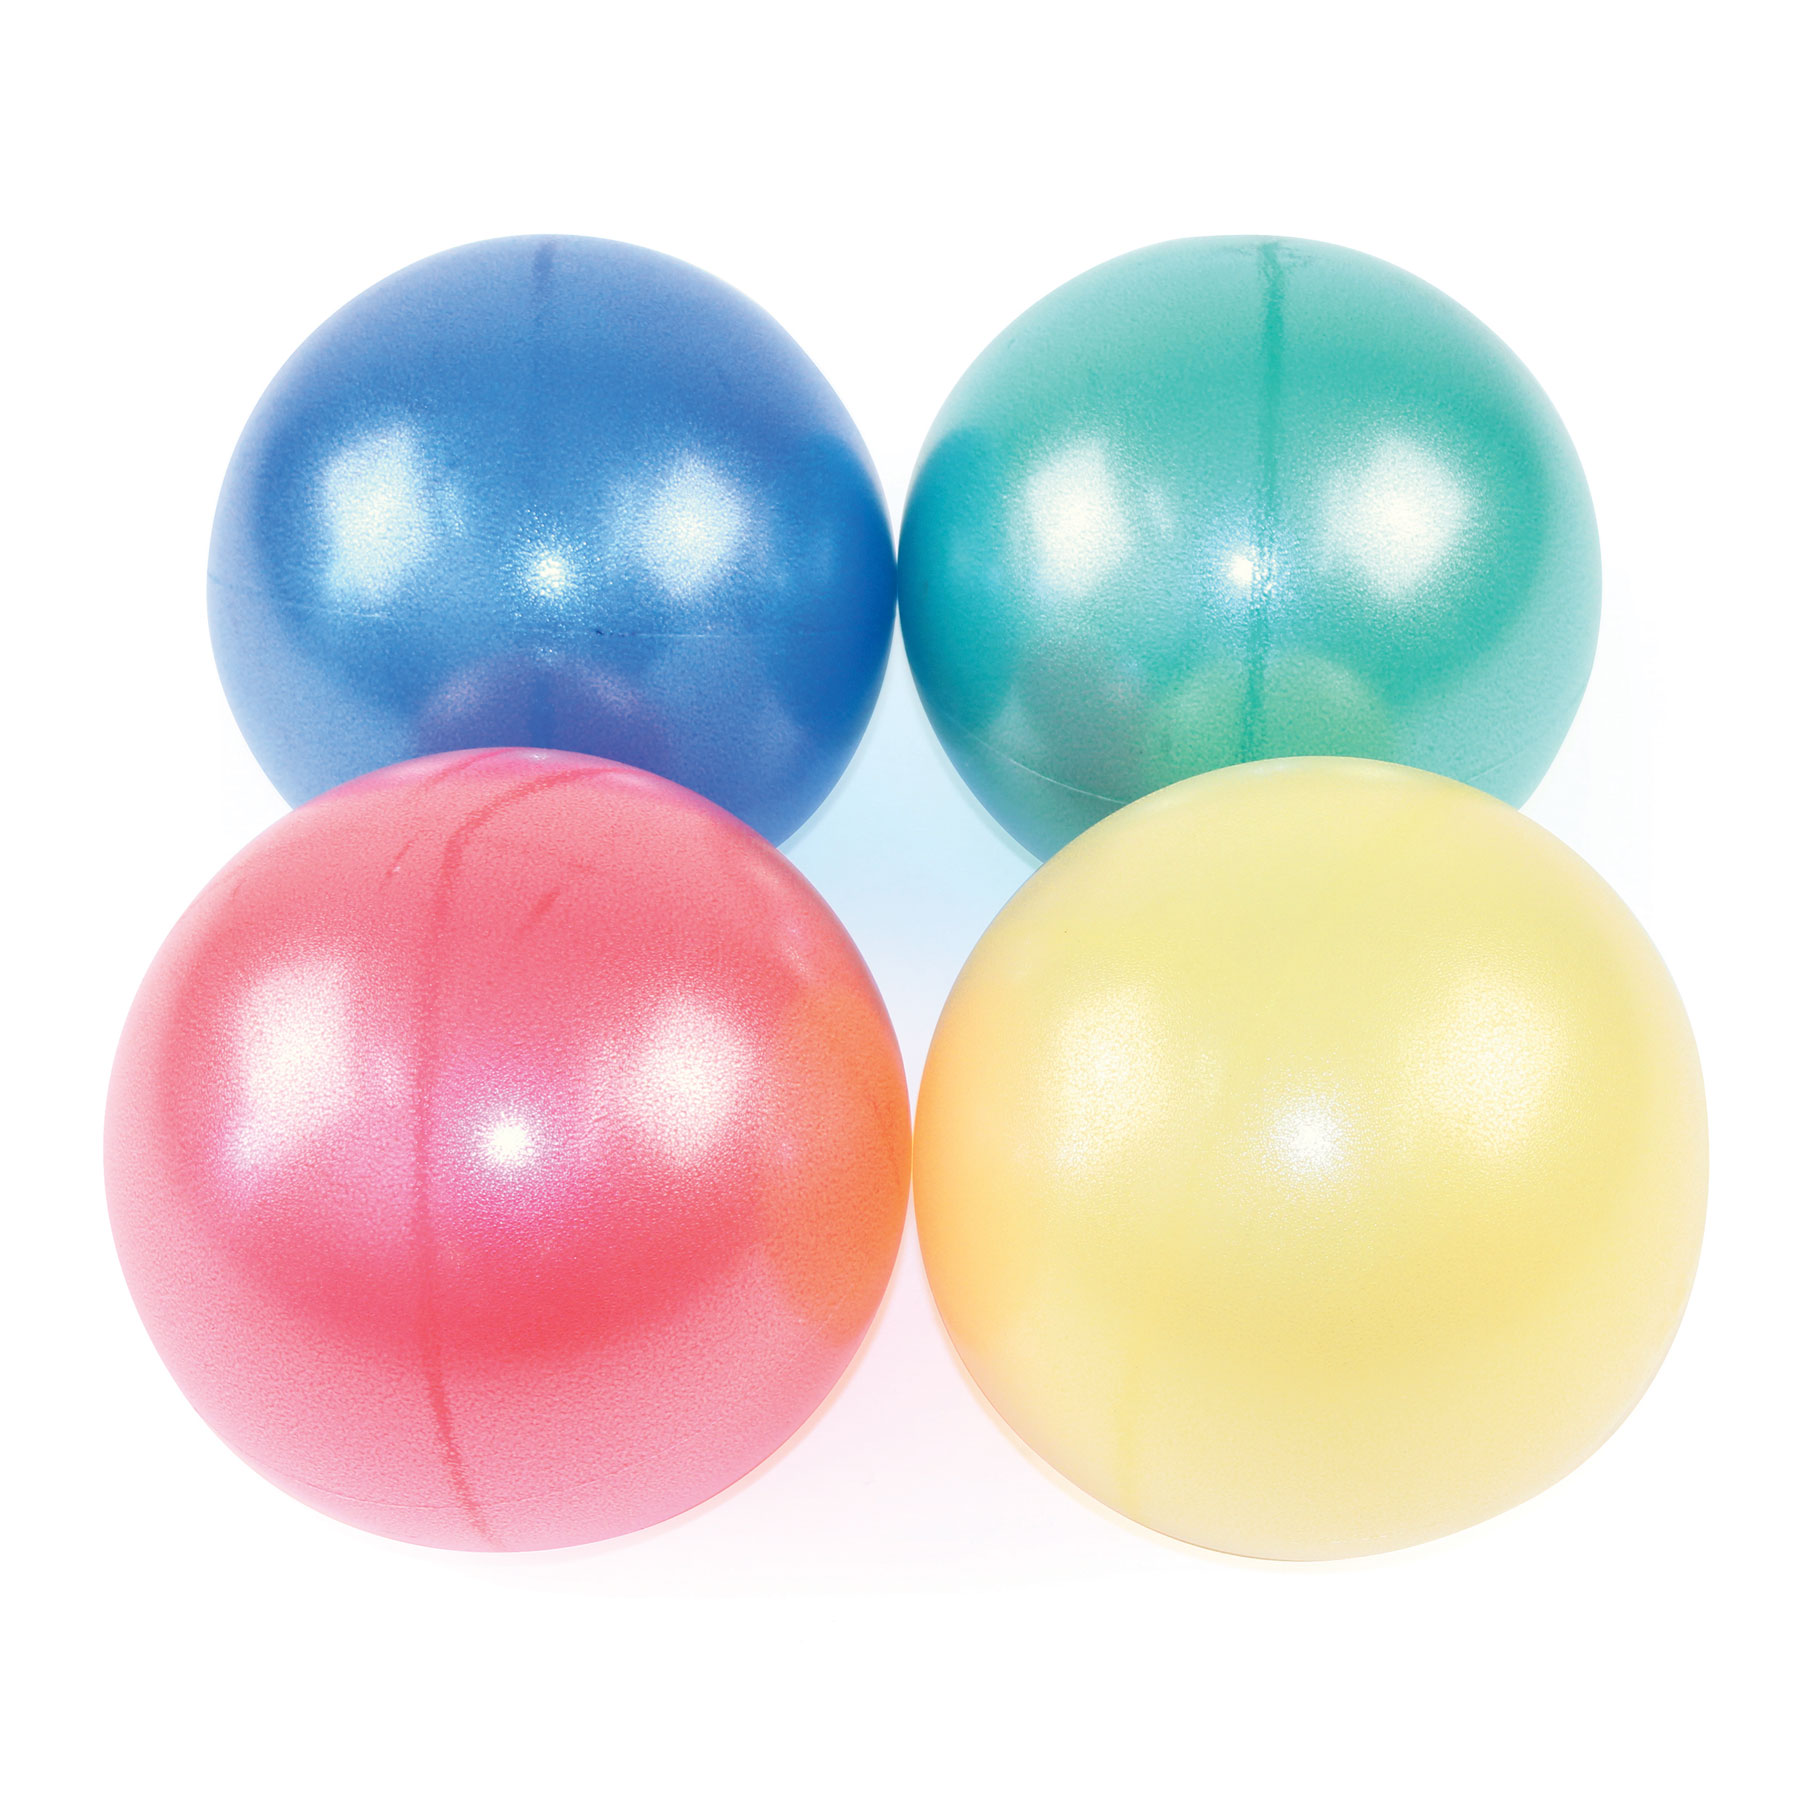 Soft Touch Play Ball - Set of 4